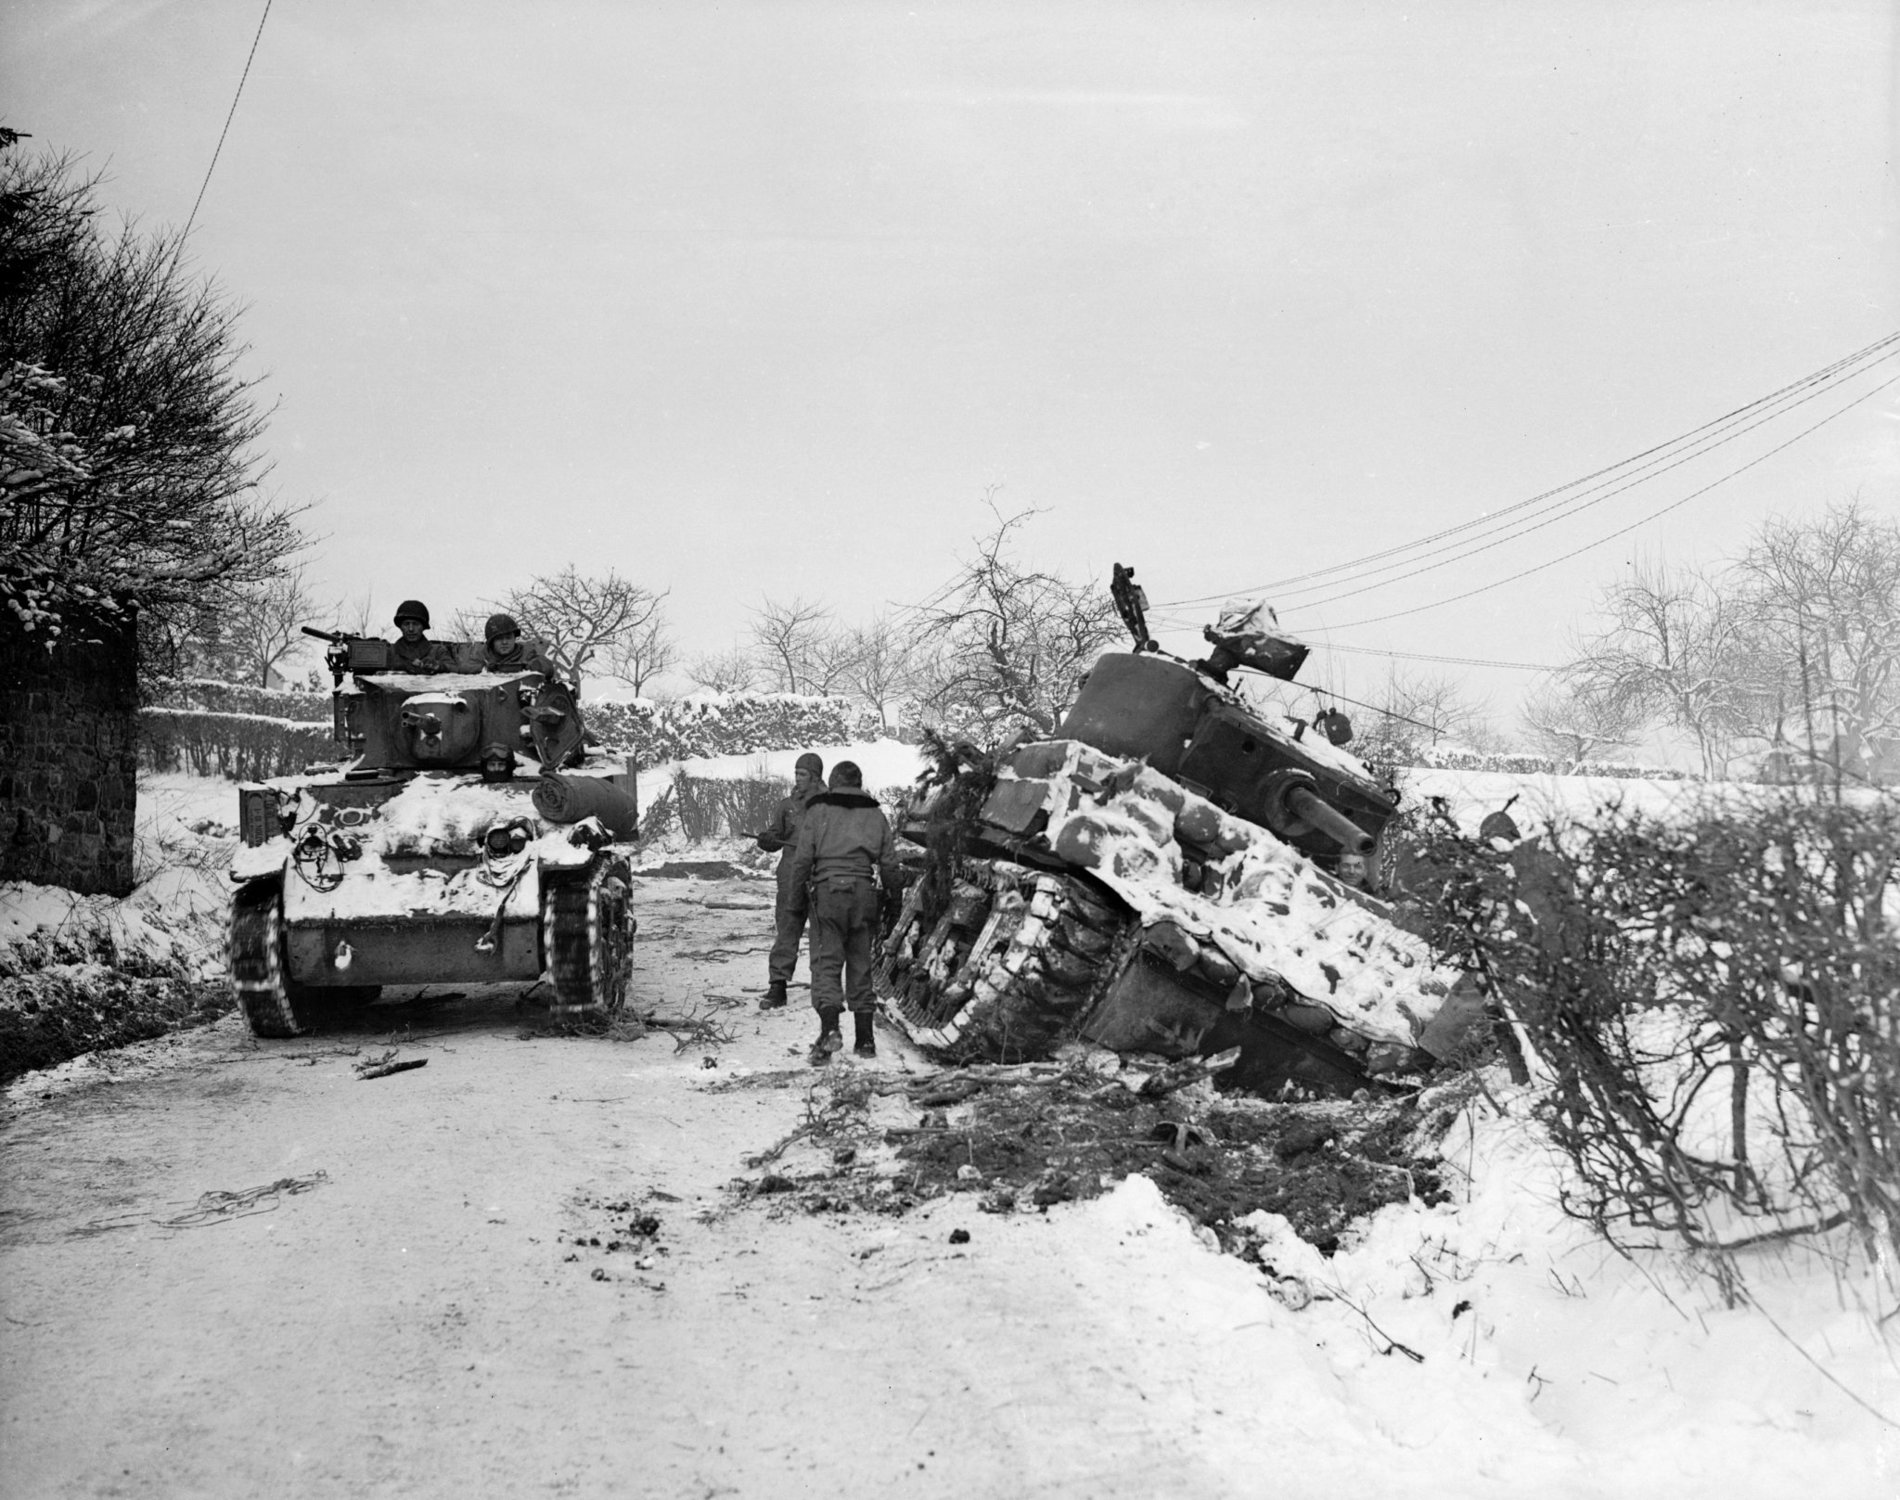 January 1945:  Hard going for US tanks at Amonines, Belgium, on the northern flank of the ‘battle of the bulge’. A tank on the road passes another being dug out of the snow.  (Photo by Fred Ramage/Keystone/Getty Images)